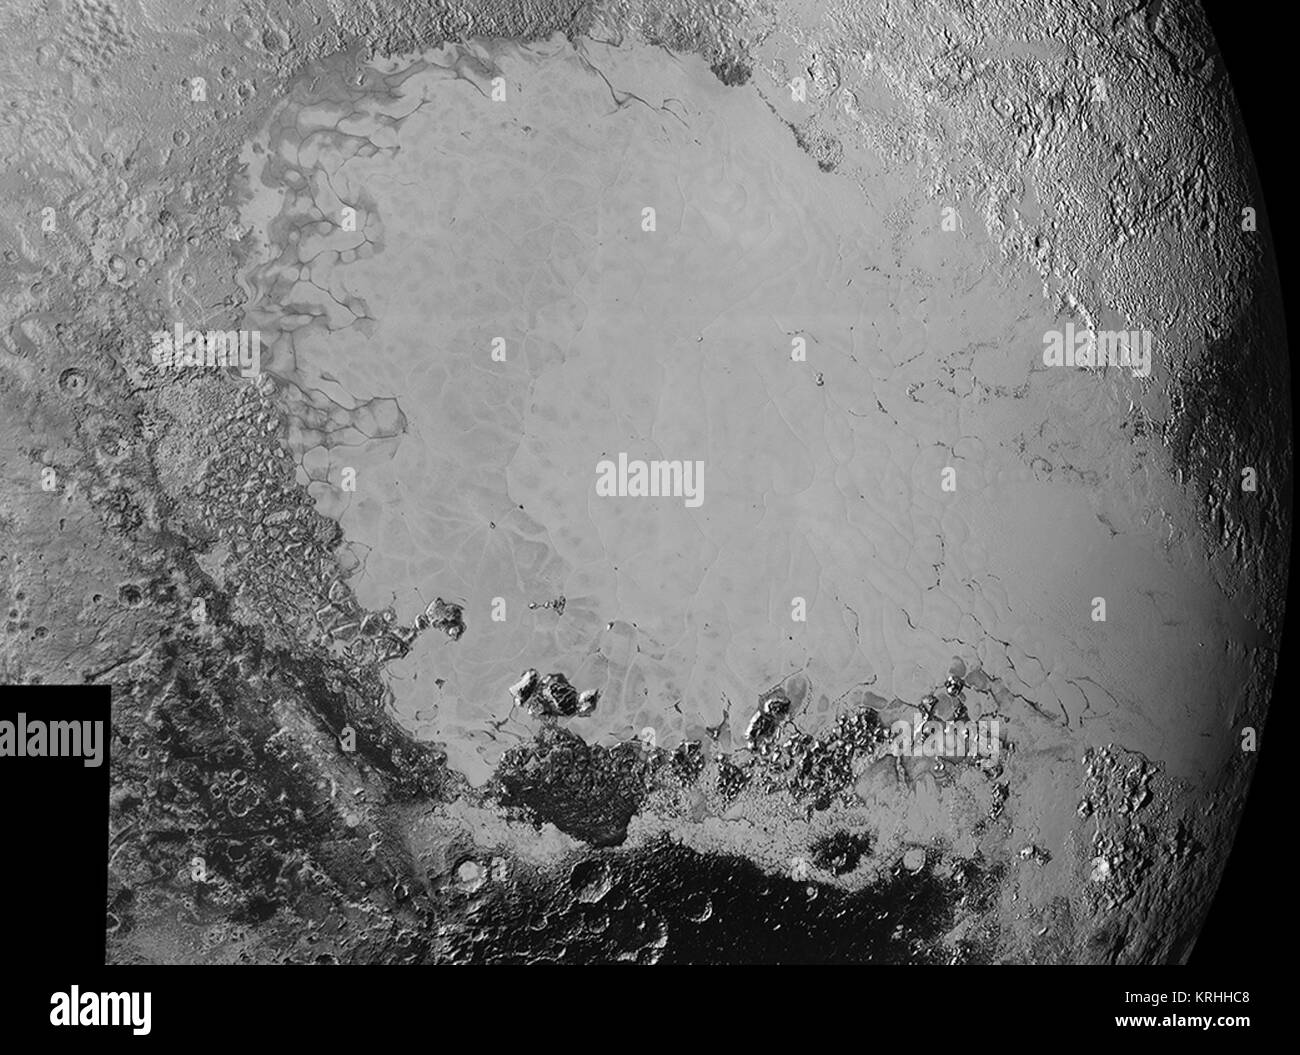 Mosaic of high-resolution images of Pluto, sent back from NASA’s New Horizons spacecraft from Sept. 5 to 7, 2015. The image is dominated by the informally-named icy plain Sputnik Planum, the smooth, bright region across the center. This image also features a tremendous variety of other landscapes surrounding Sputnik. The smallest visible features are 0.5 miles (0.8 kilometers) in size, and the mosaic covers a region roughly 1,000 miles (1600 kilometers) wide. The image was taken as New Horizons flew past Pluto on July 14, 2015, from a distance of 50,000 miles (80,000 kilometers). Credits: NASA Stock Photo